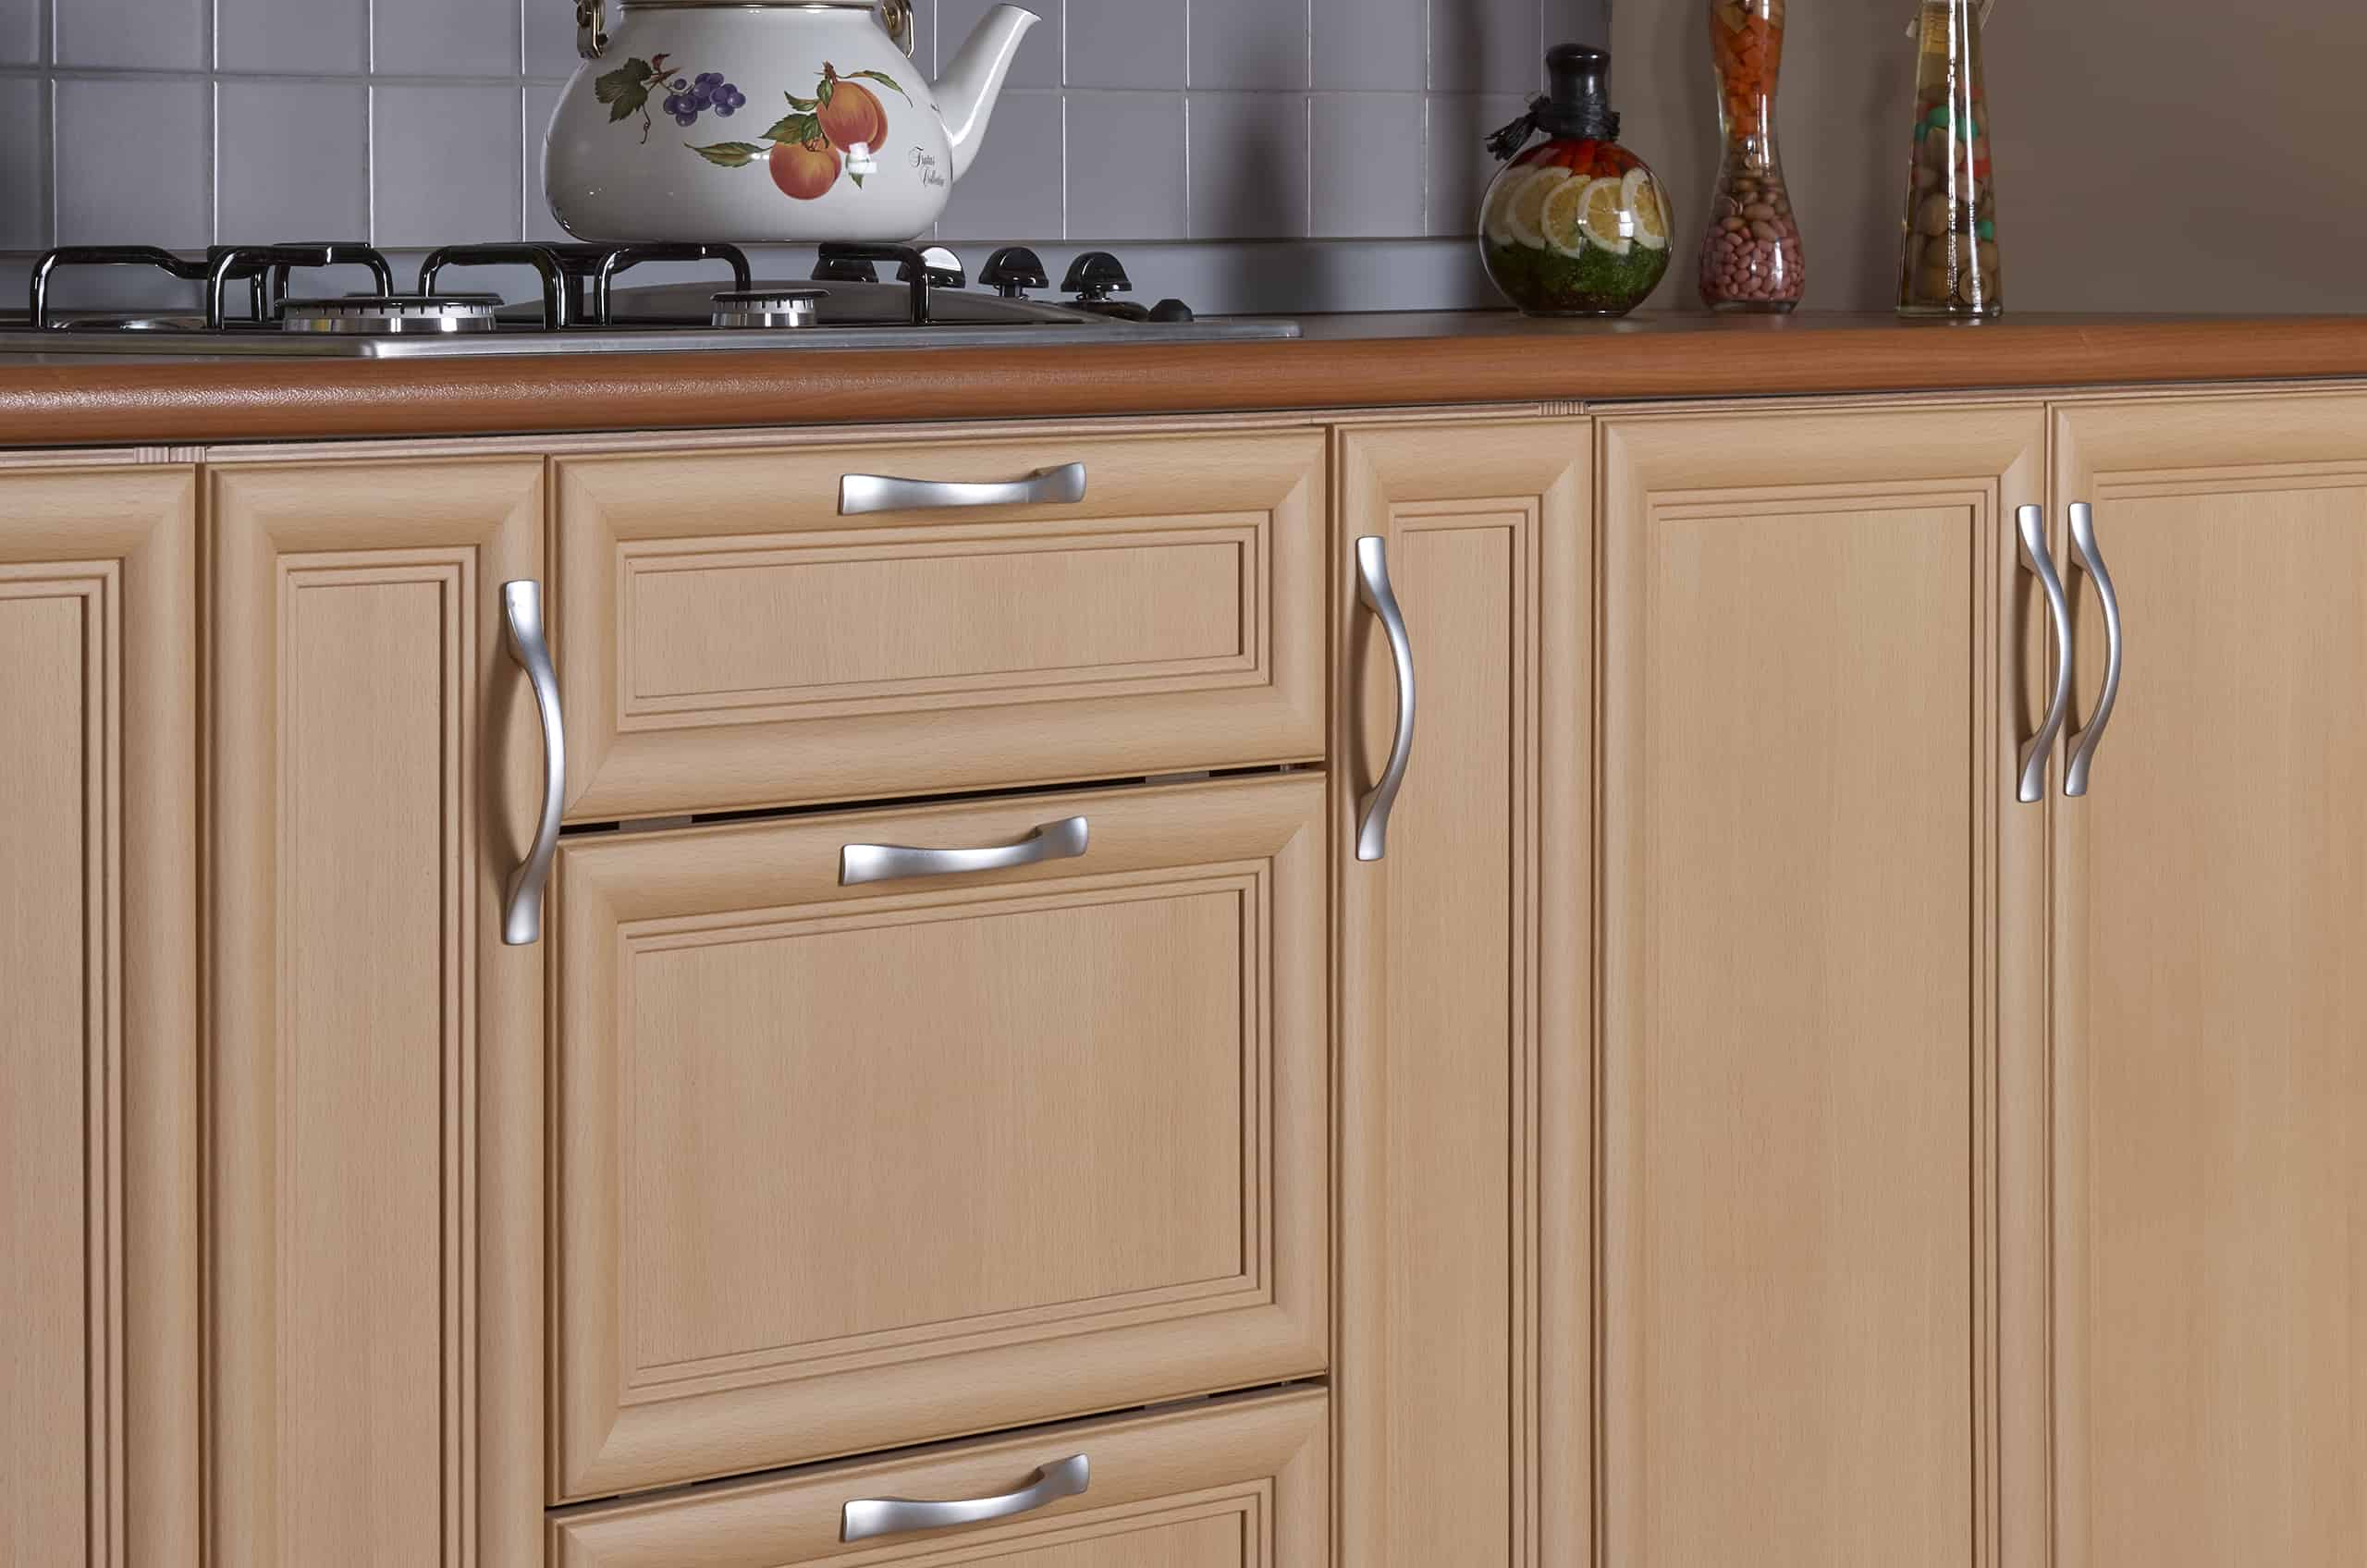 Cabinet Hardware Placement Guide, What Is The Proper Placement For Kitchen Drawer Pulls